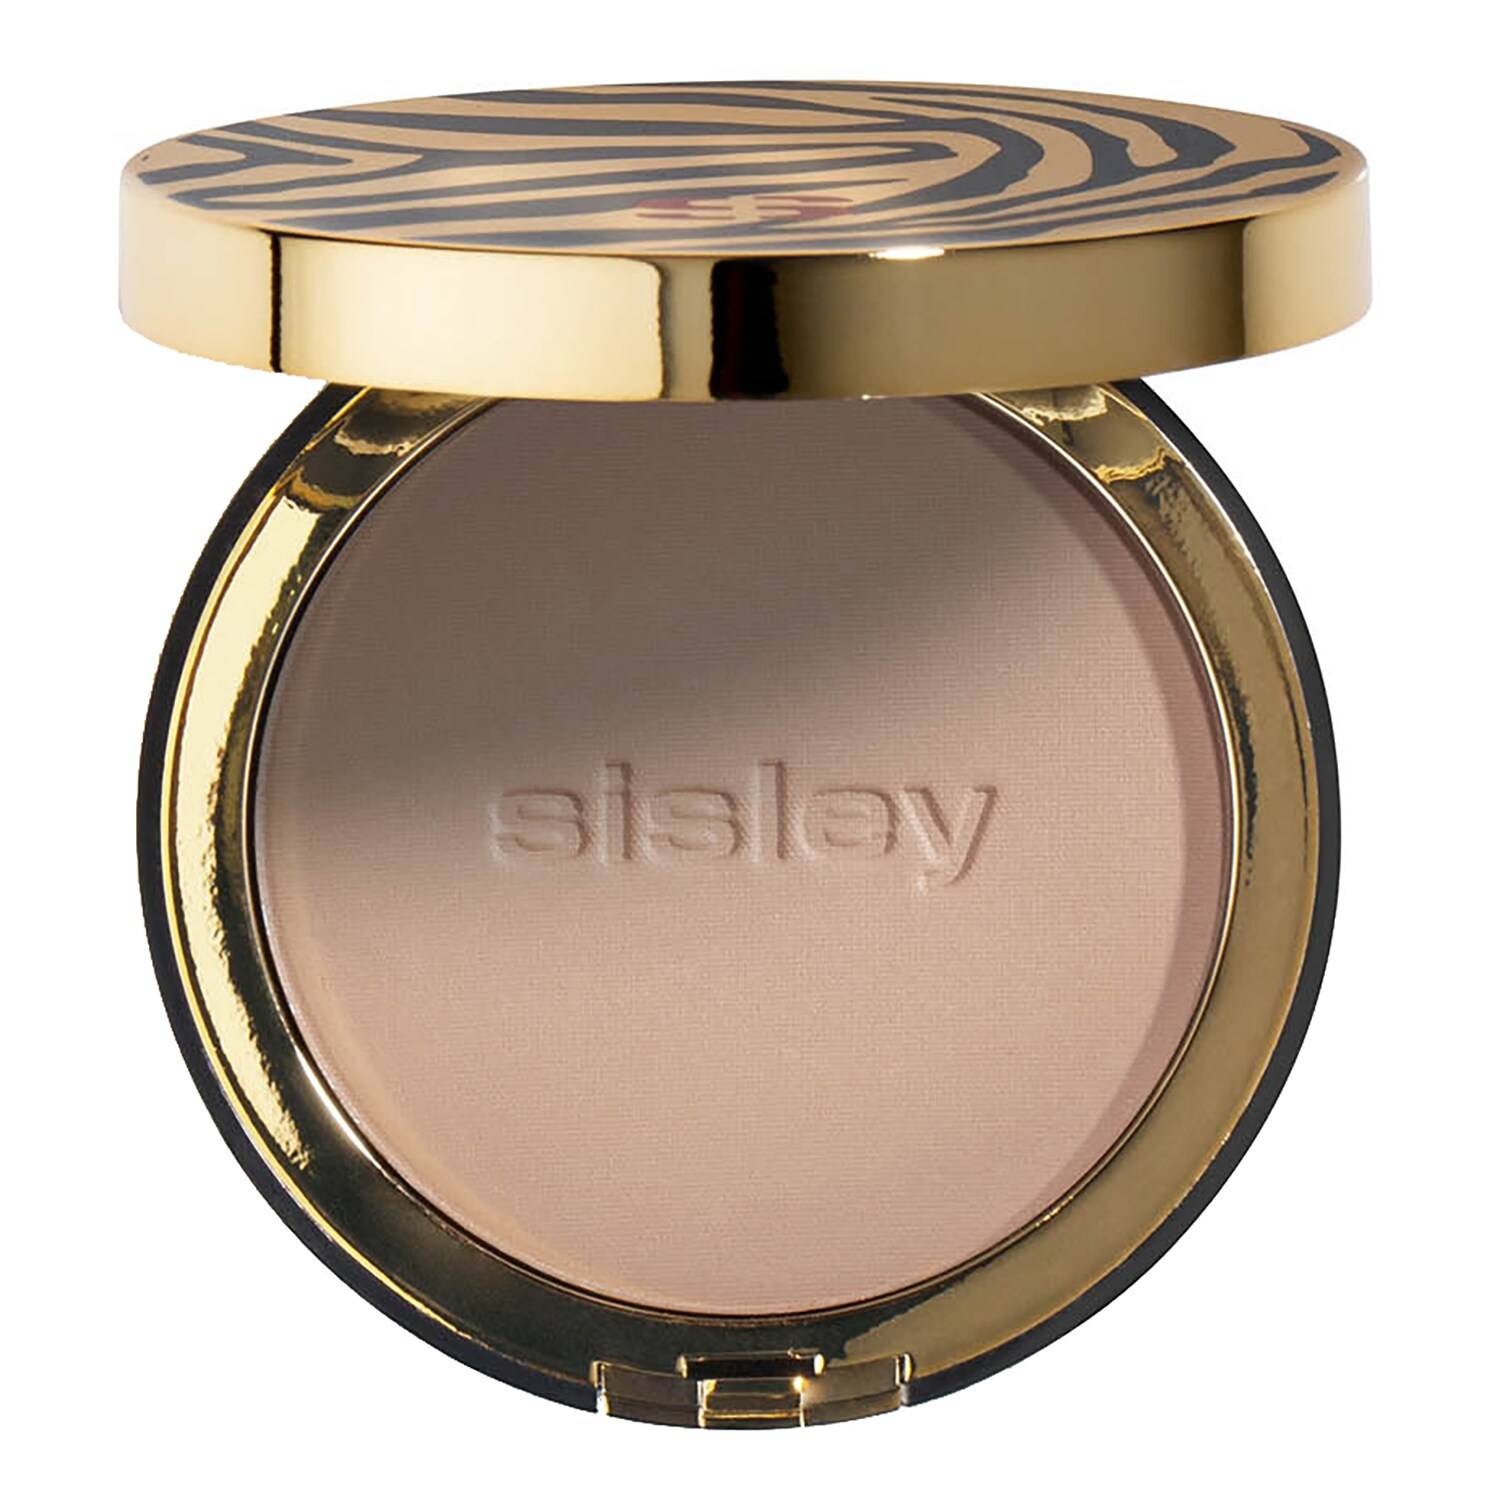 Sisley Phyto-Poudre Compacte 12G Phyto Poudre Compact 1 Rosy